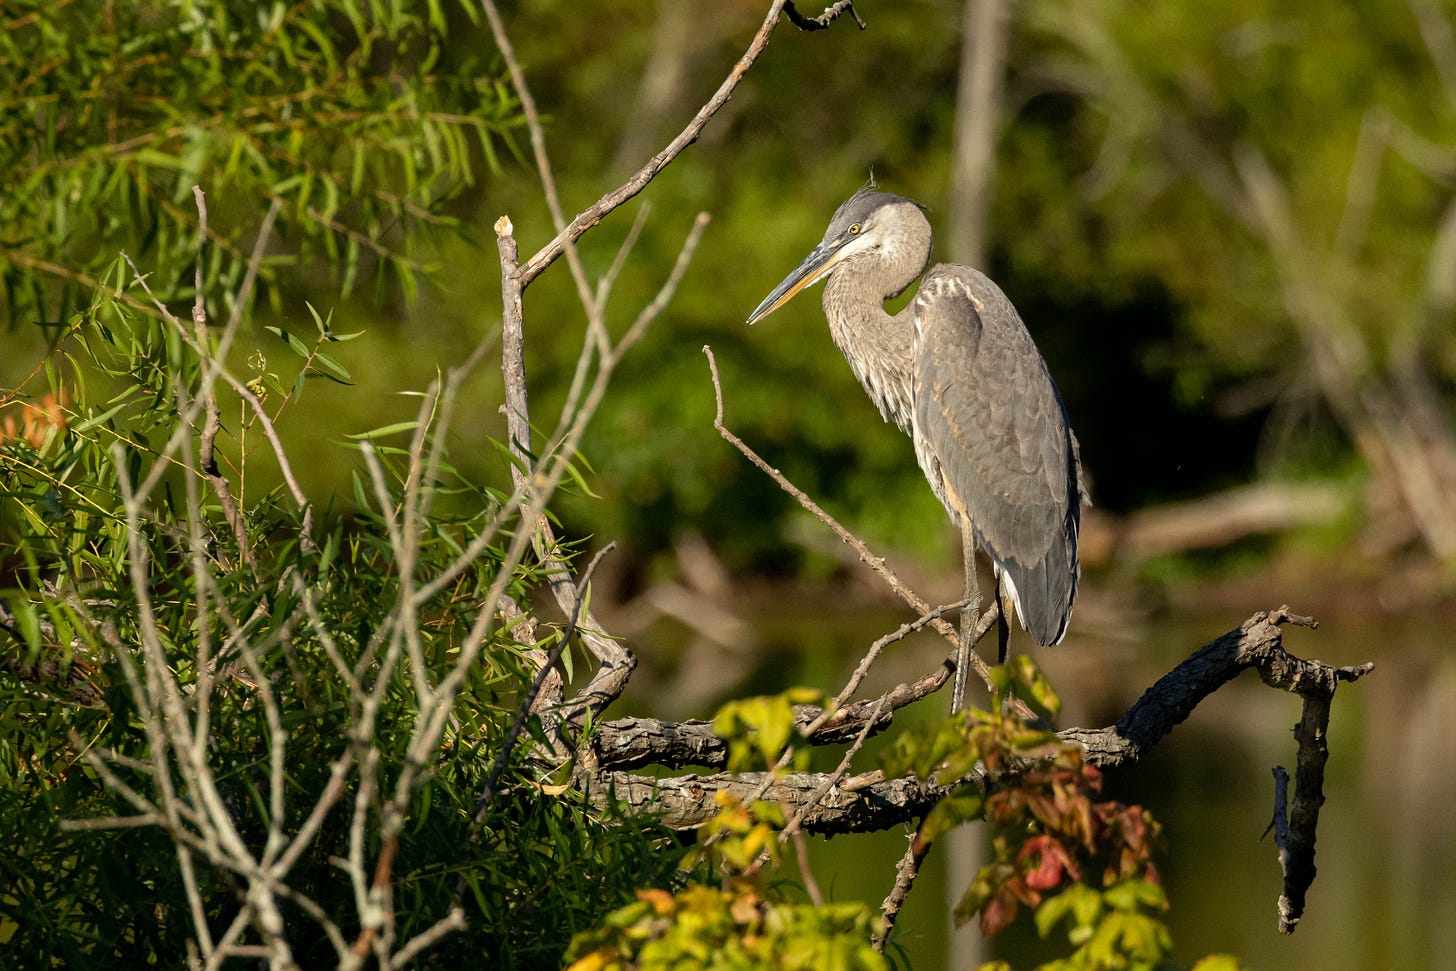 a great blue heron - a long, bluish-gray wading bird standing on a branch against a green background